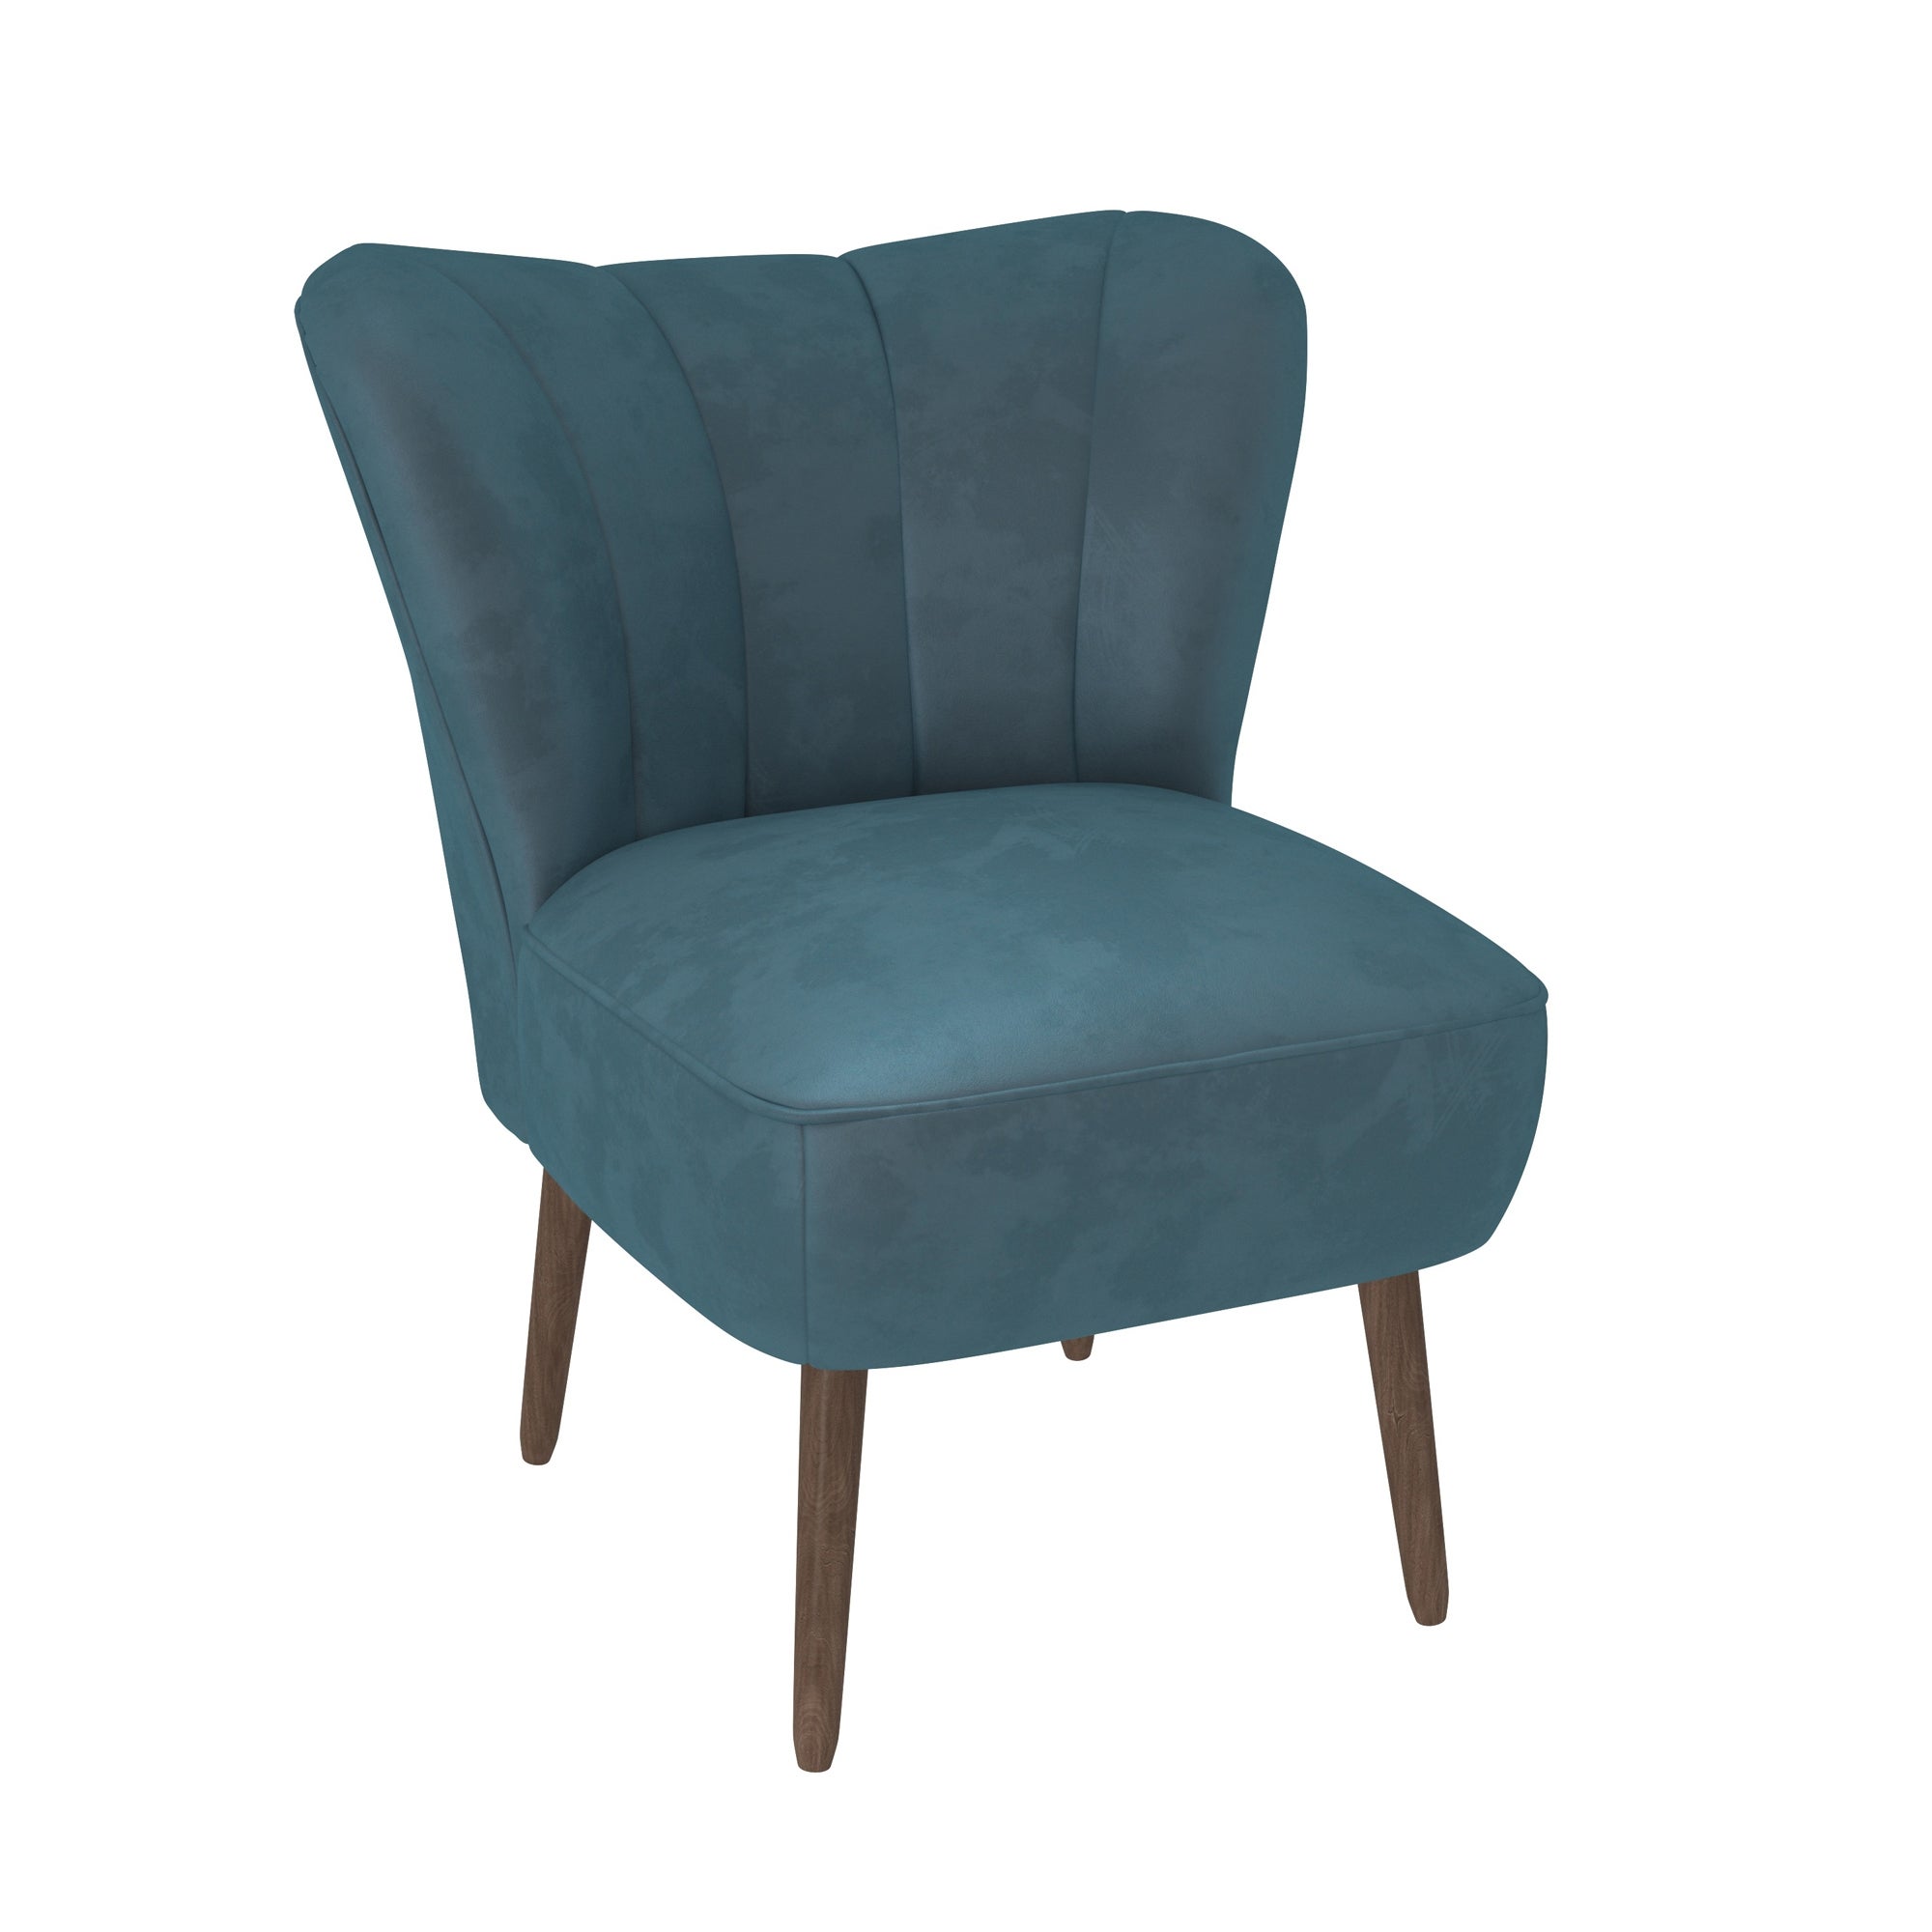 Photo of Abby velvet cocktail chair - pacific blue